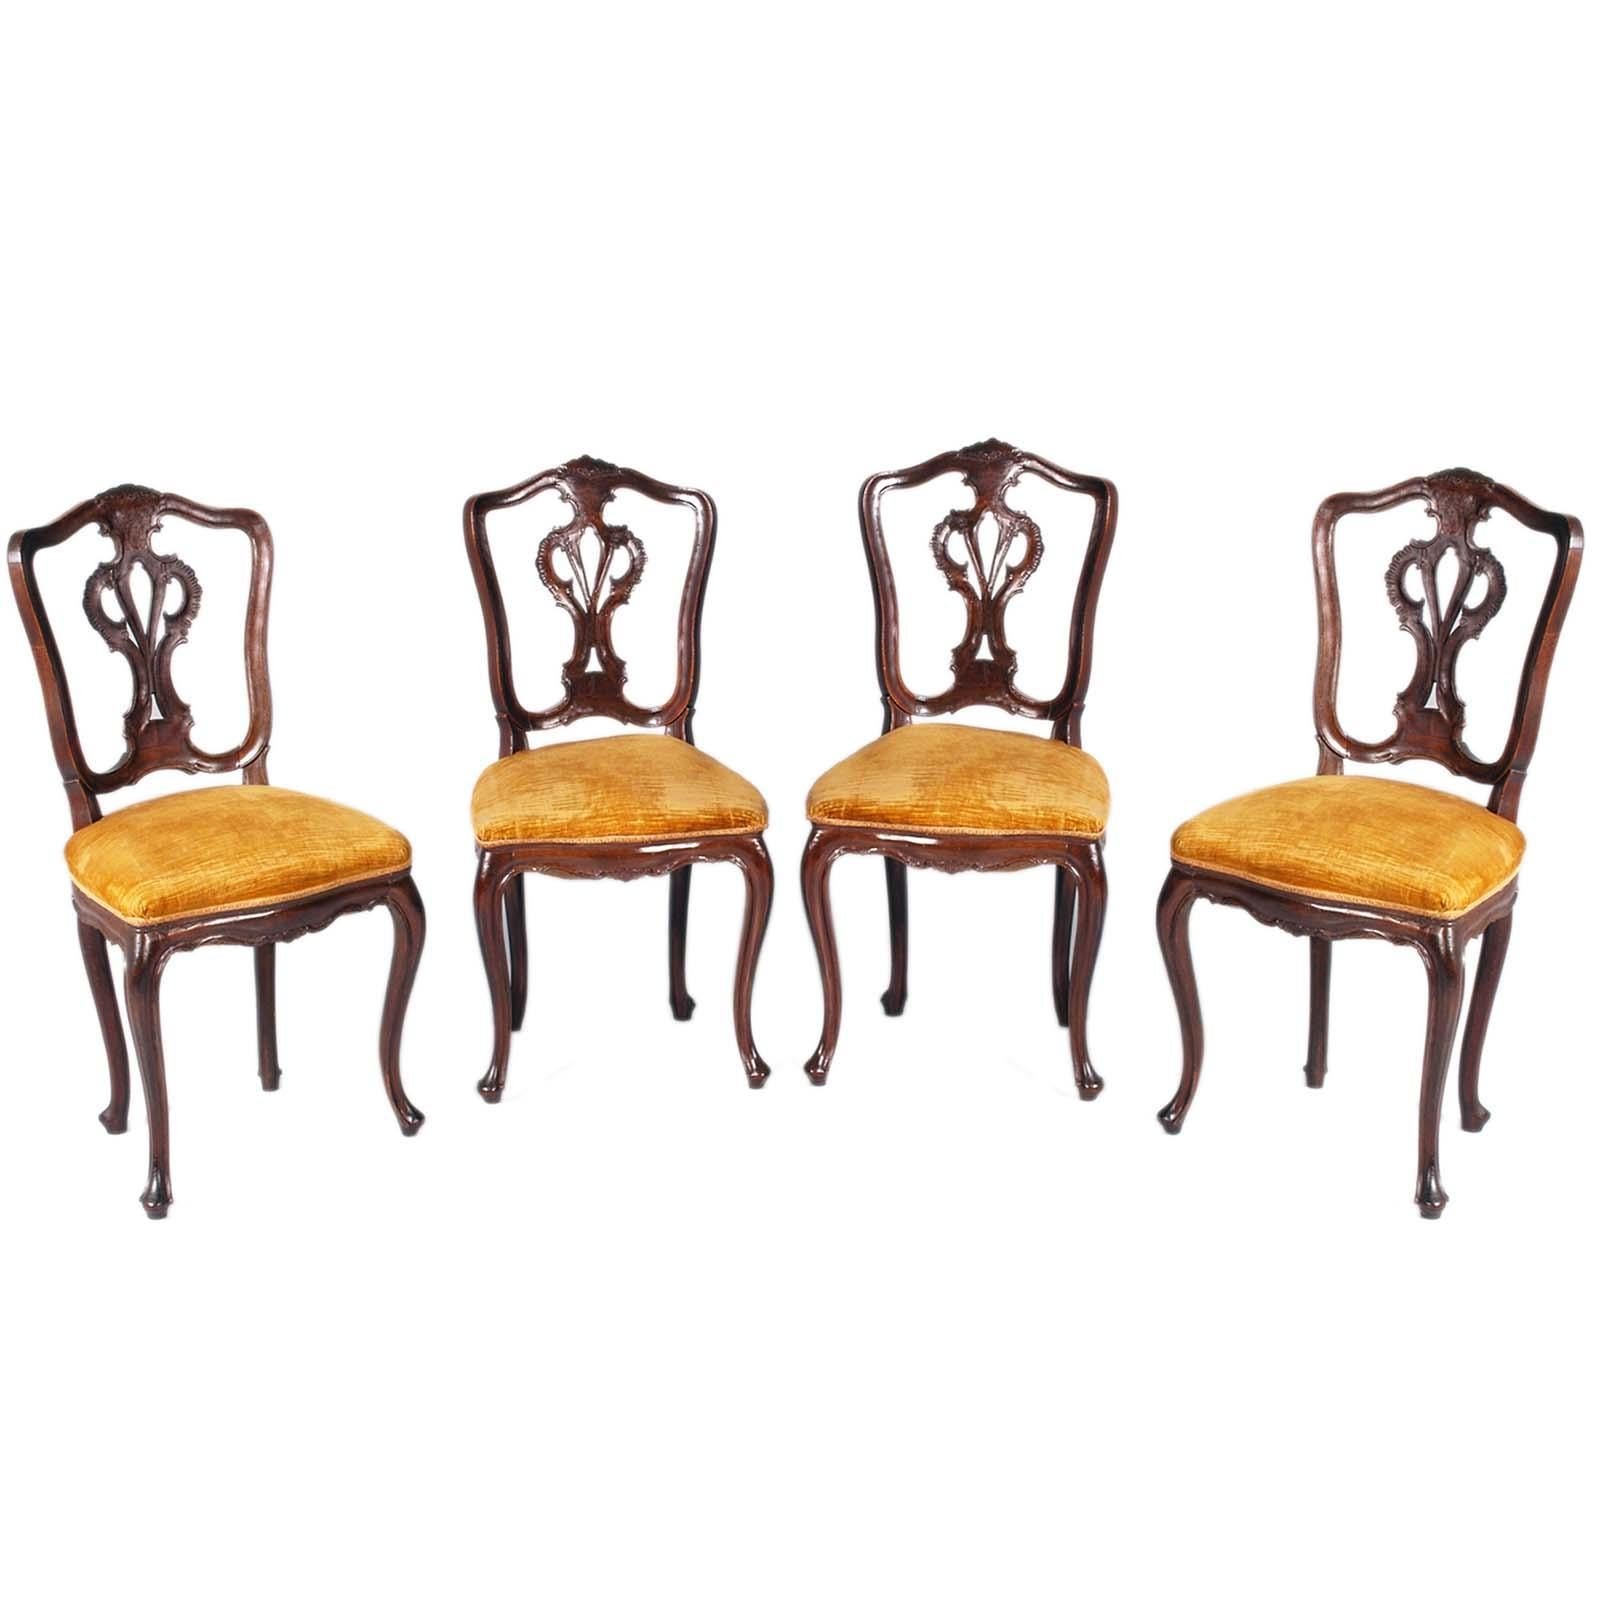 Refined Venice Four Louis XVI Chairs, 19th century, with velvet upholstery still usable, reupholsterable on request. Reinforced structure for daily use. Spring seat. Beautiful original antique patina
The design of the chairs can be attributed to the